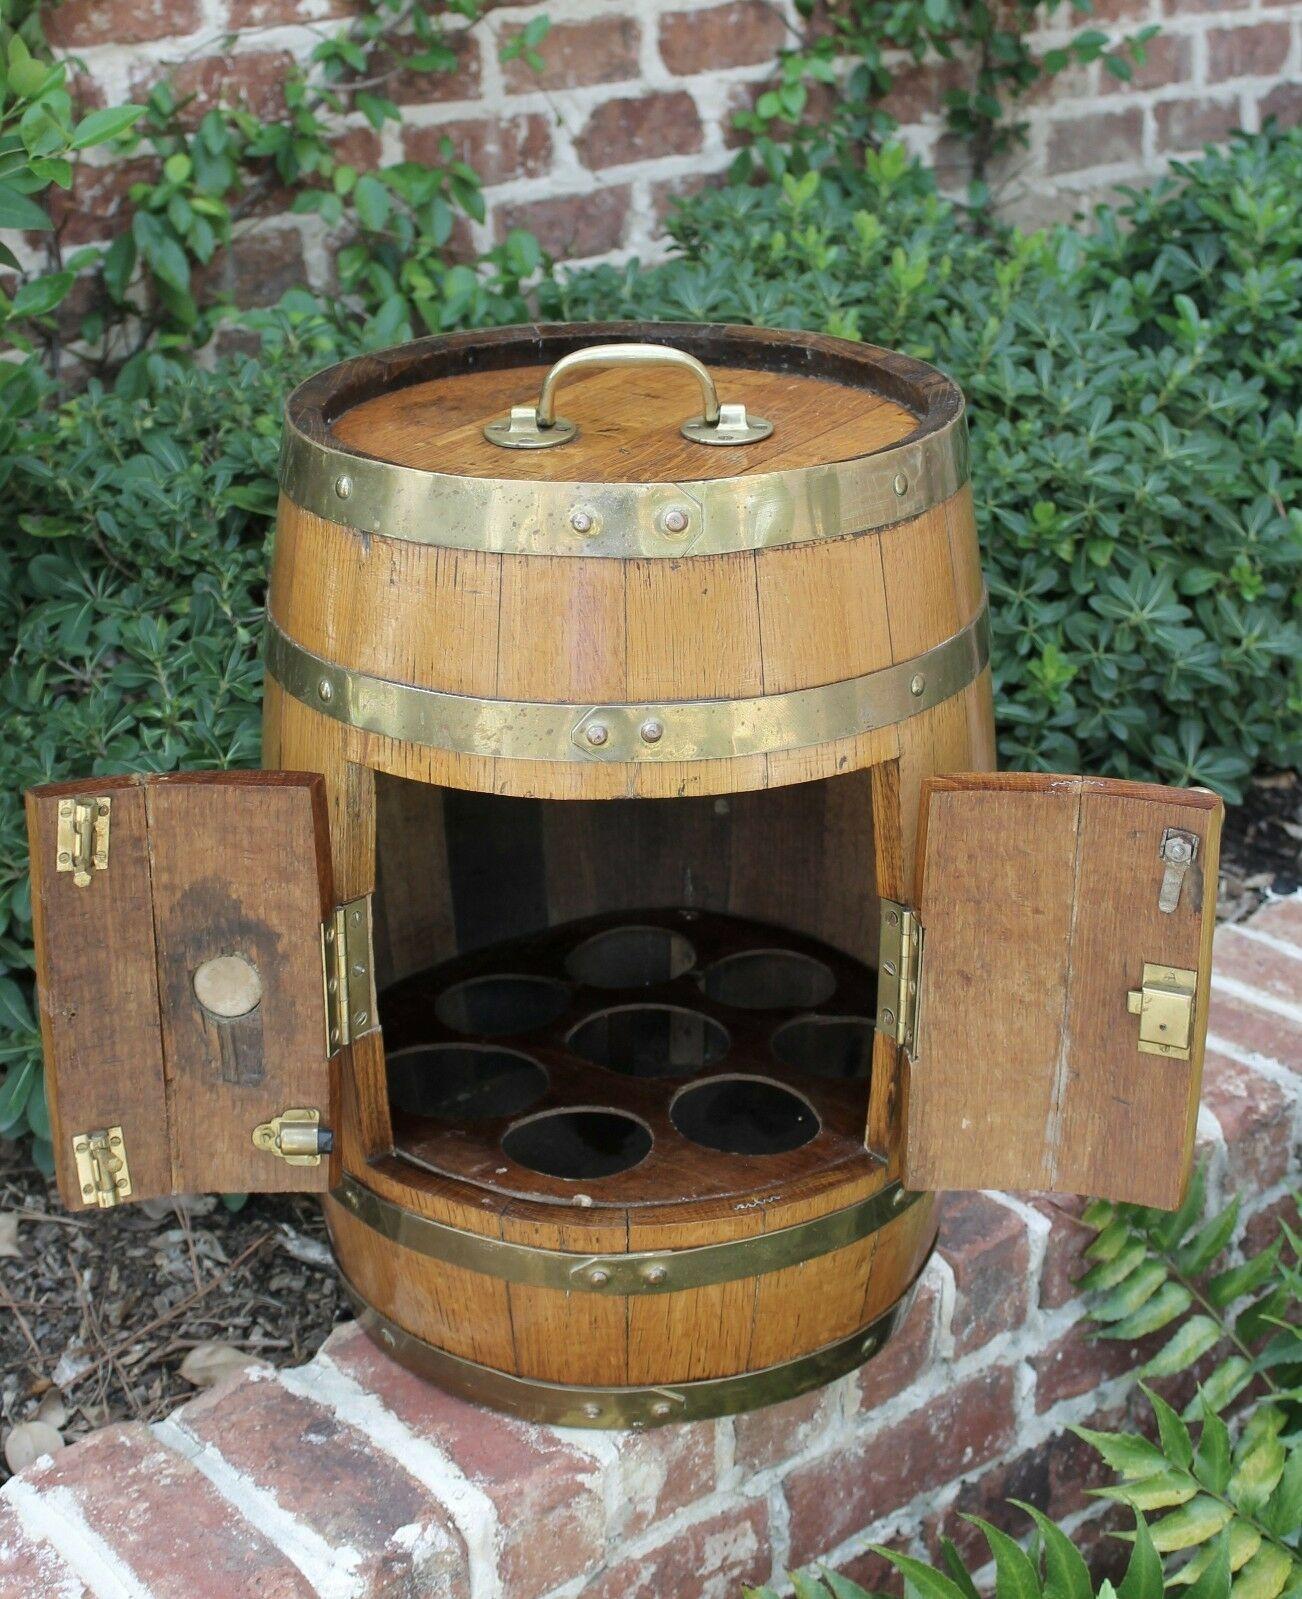 Unique antique English oak brass banded barrel wine or liquor bar cabinet pub decanter~~c. 1920s

Sturdy oak barrel with brass banding and hinged doors~~
Interior bar with cutouts holds 8 bottles~~
Round oak serving tray can be placed over lid